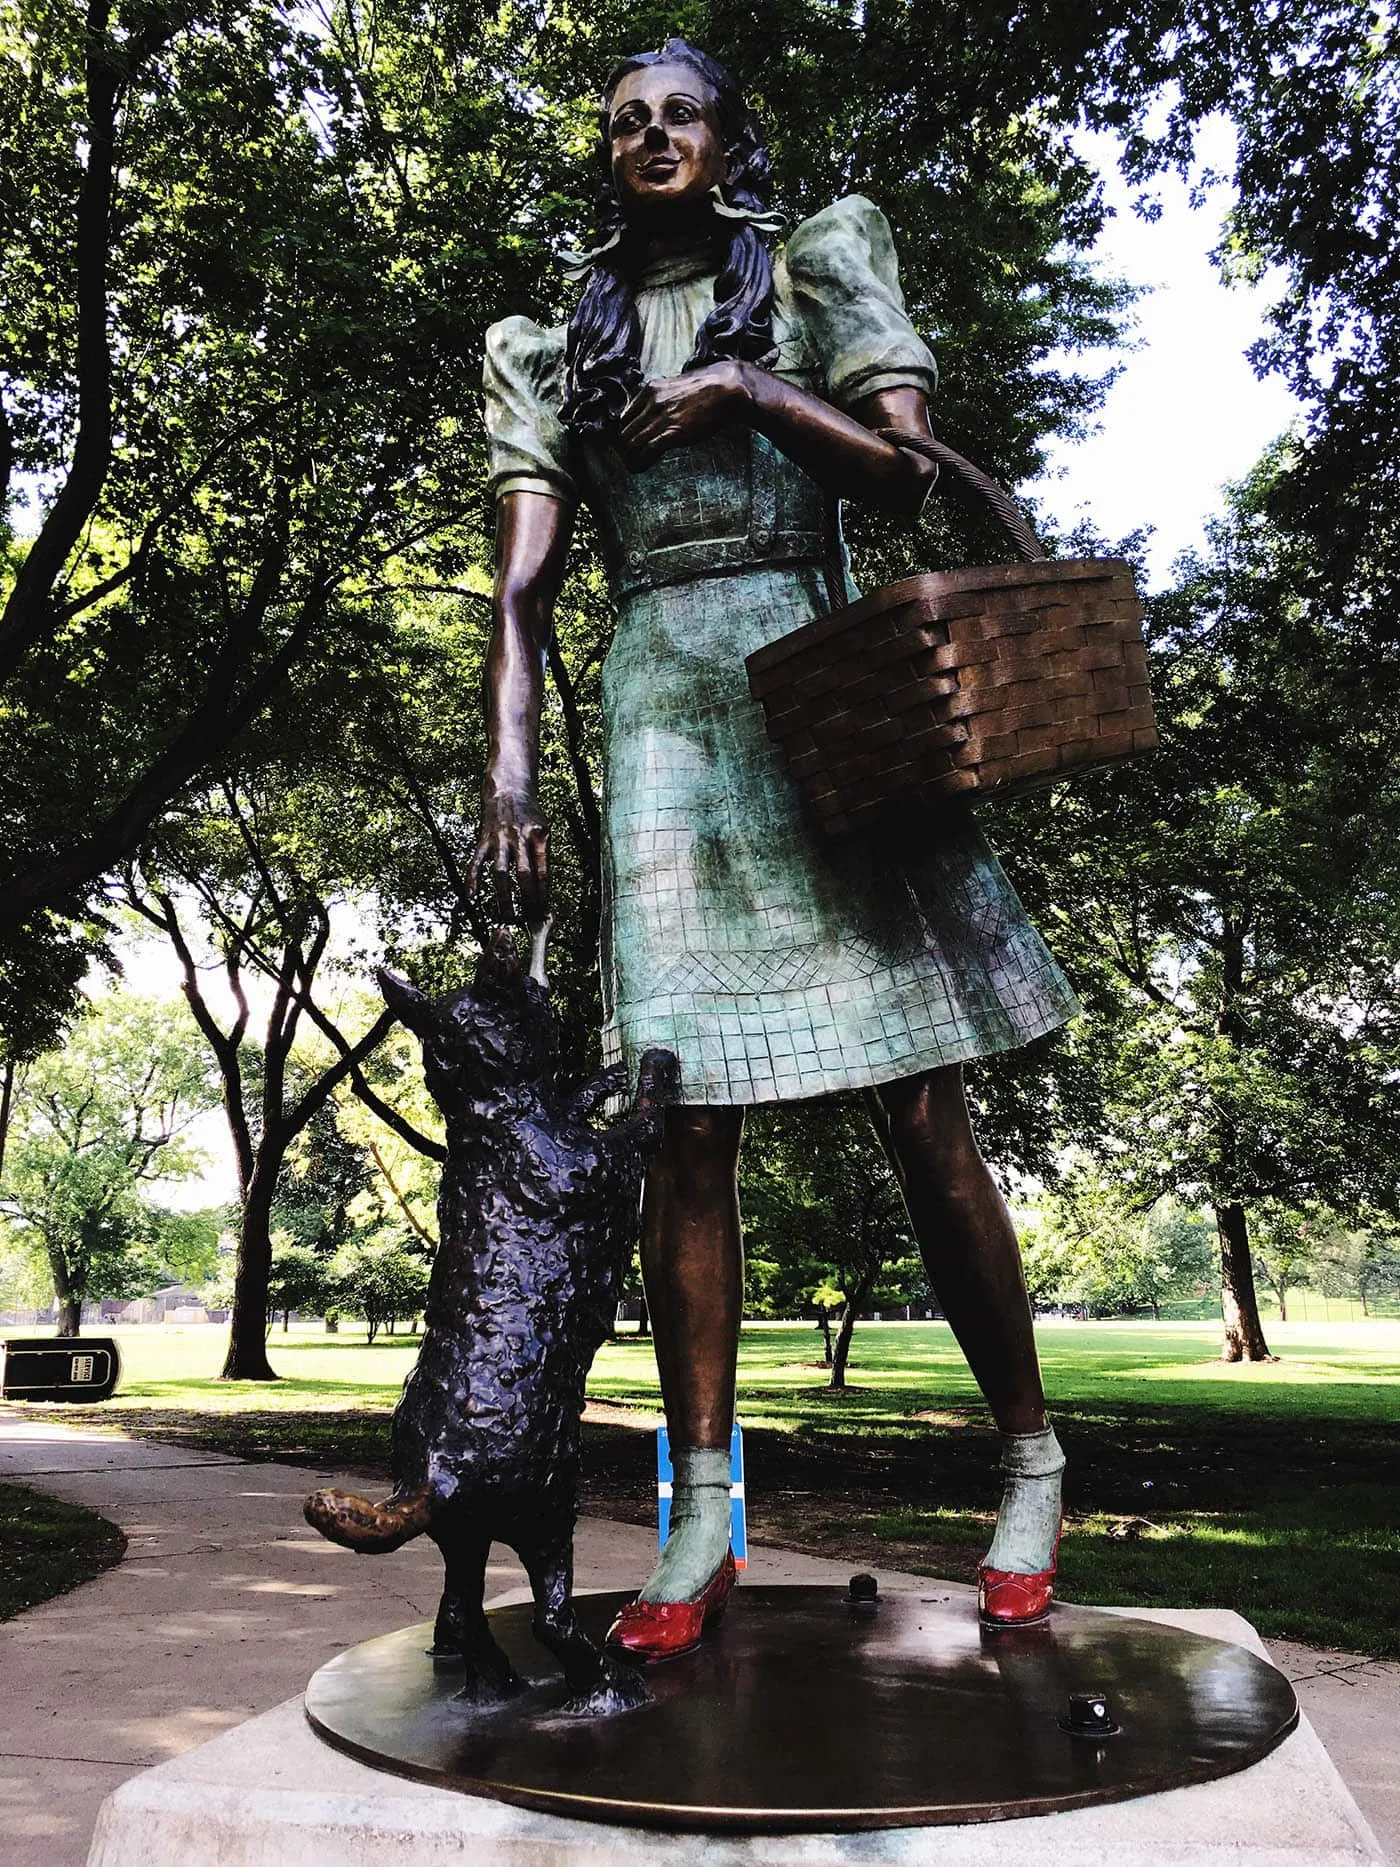 Dorothy and Toto  statue at Oz Park in Chicago, Illinois - a Wizard of Oz themed Park.